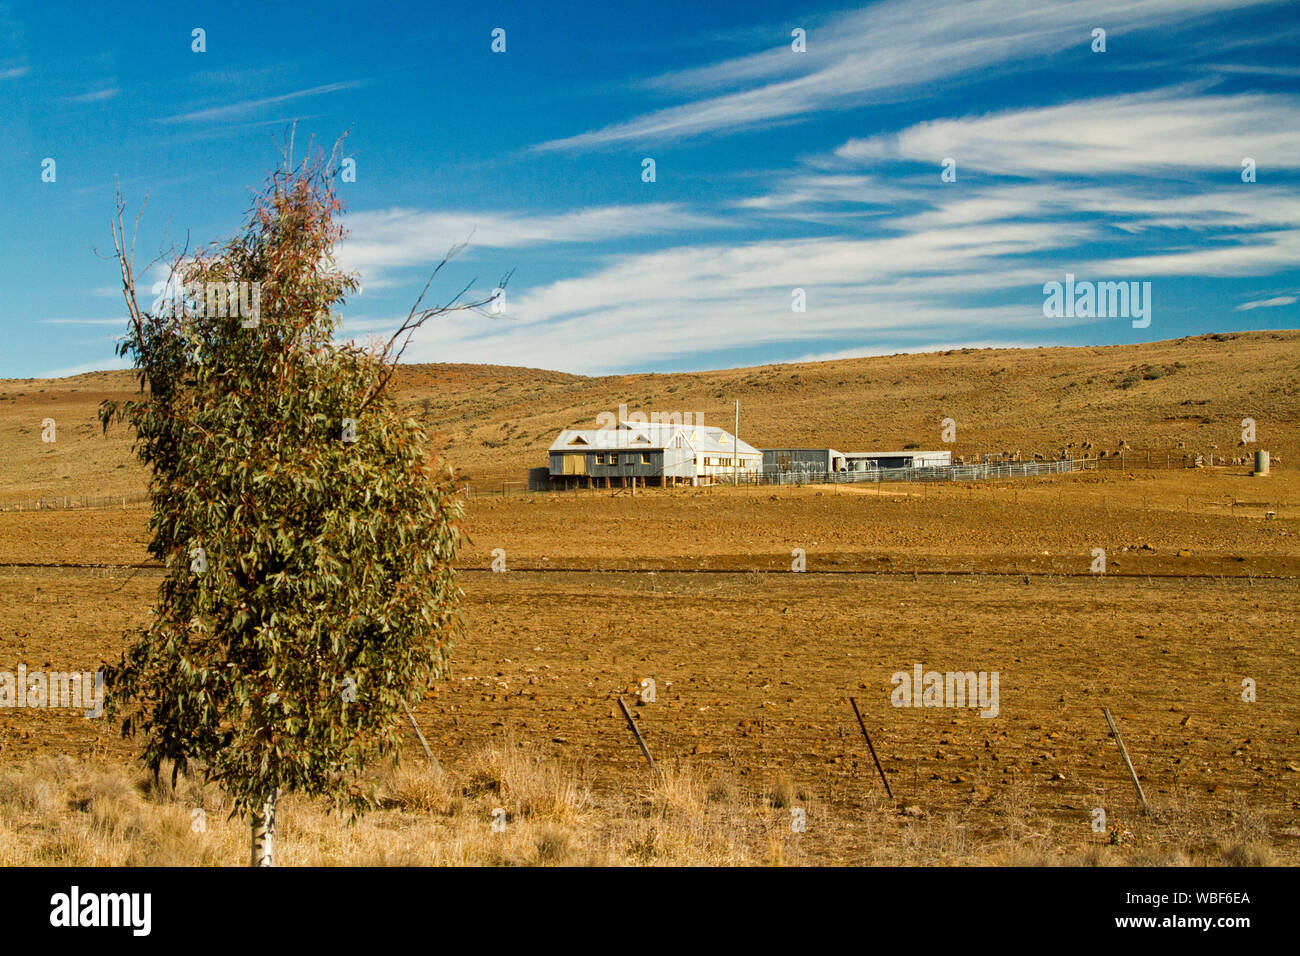 Australian rural landscape with shearing shed and stock yards on barren ground devoid of grass and under blue sky during drought in NSW Stock Photo